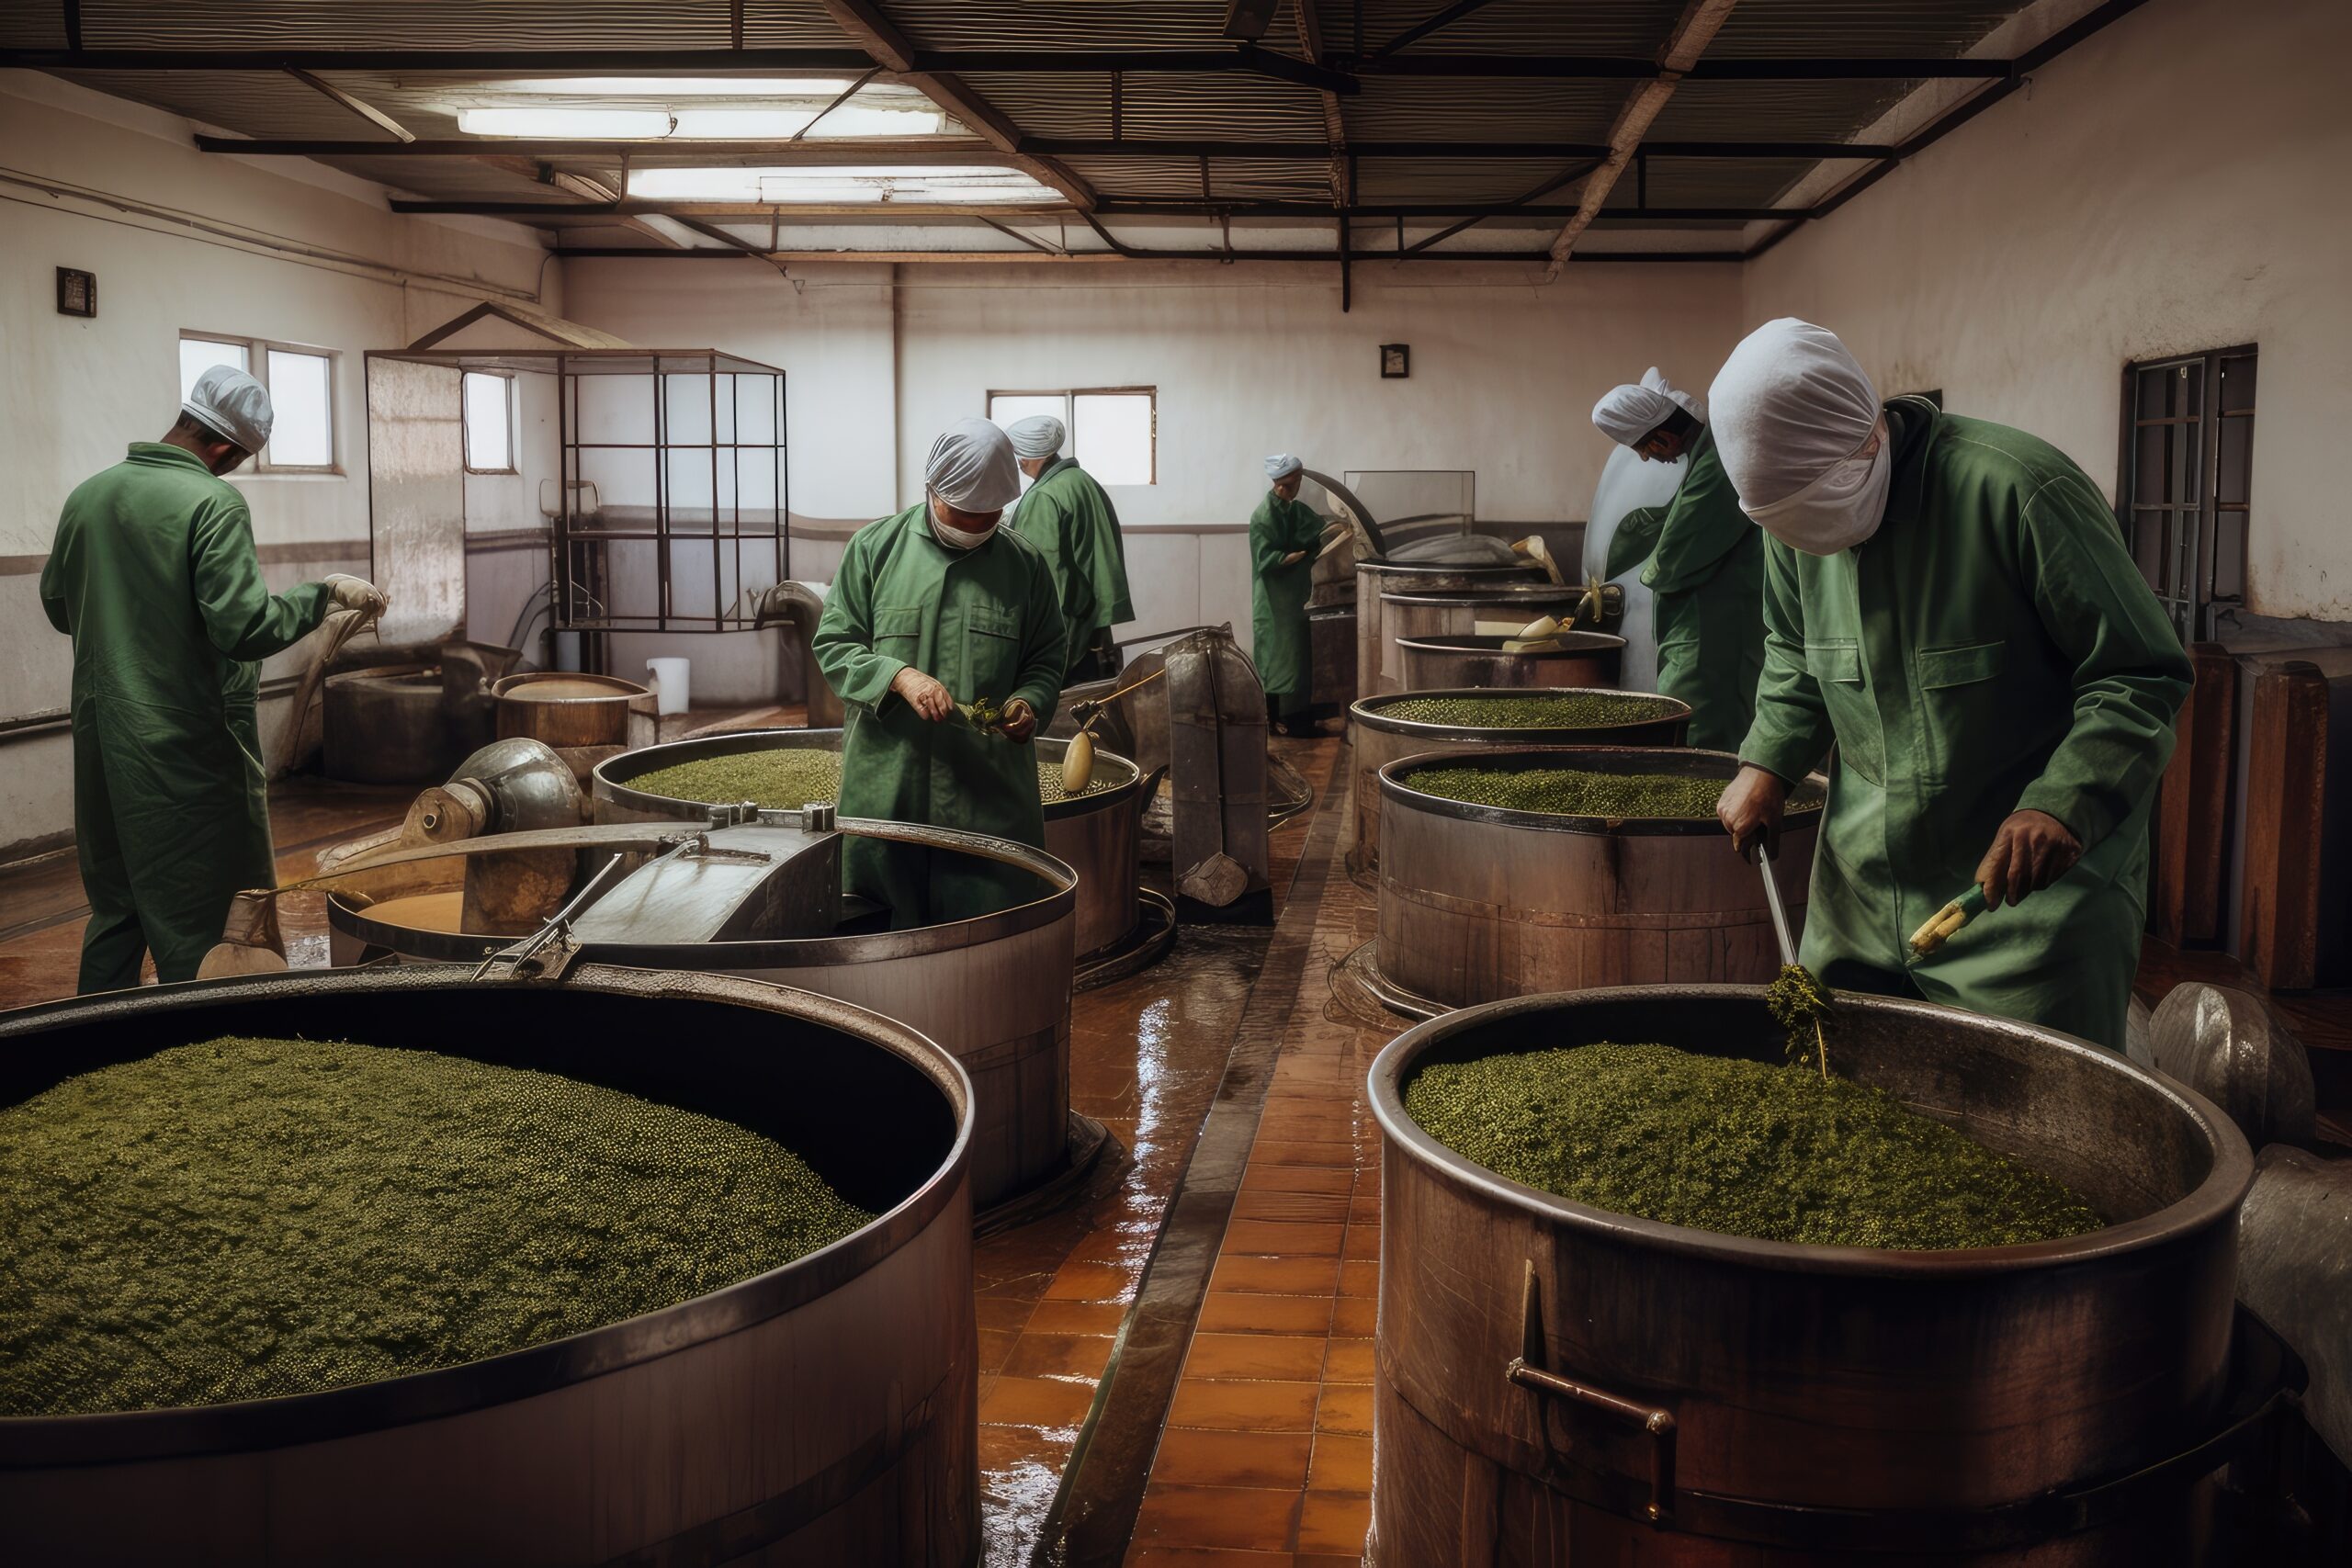 extraction processing plant with workers extracting essential oils from various herbs scaled